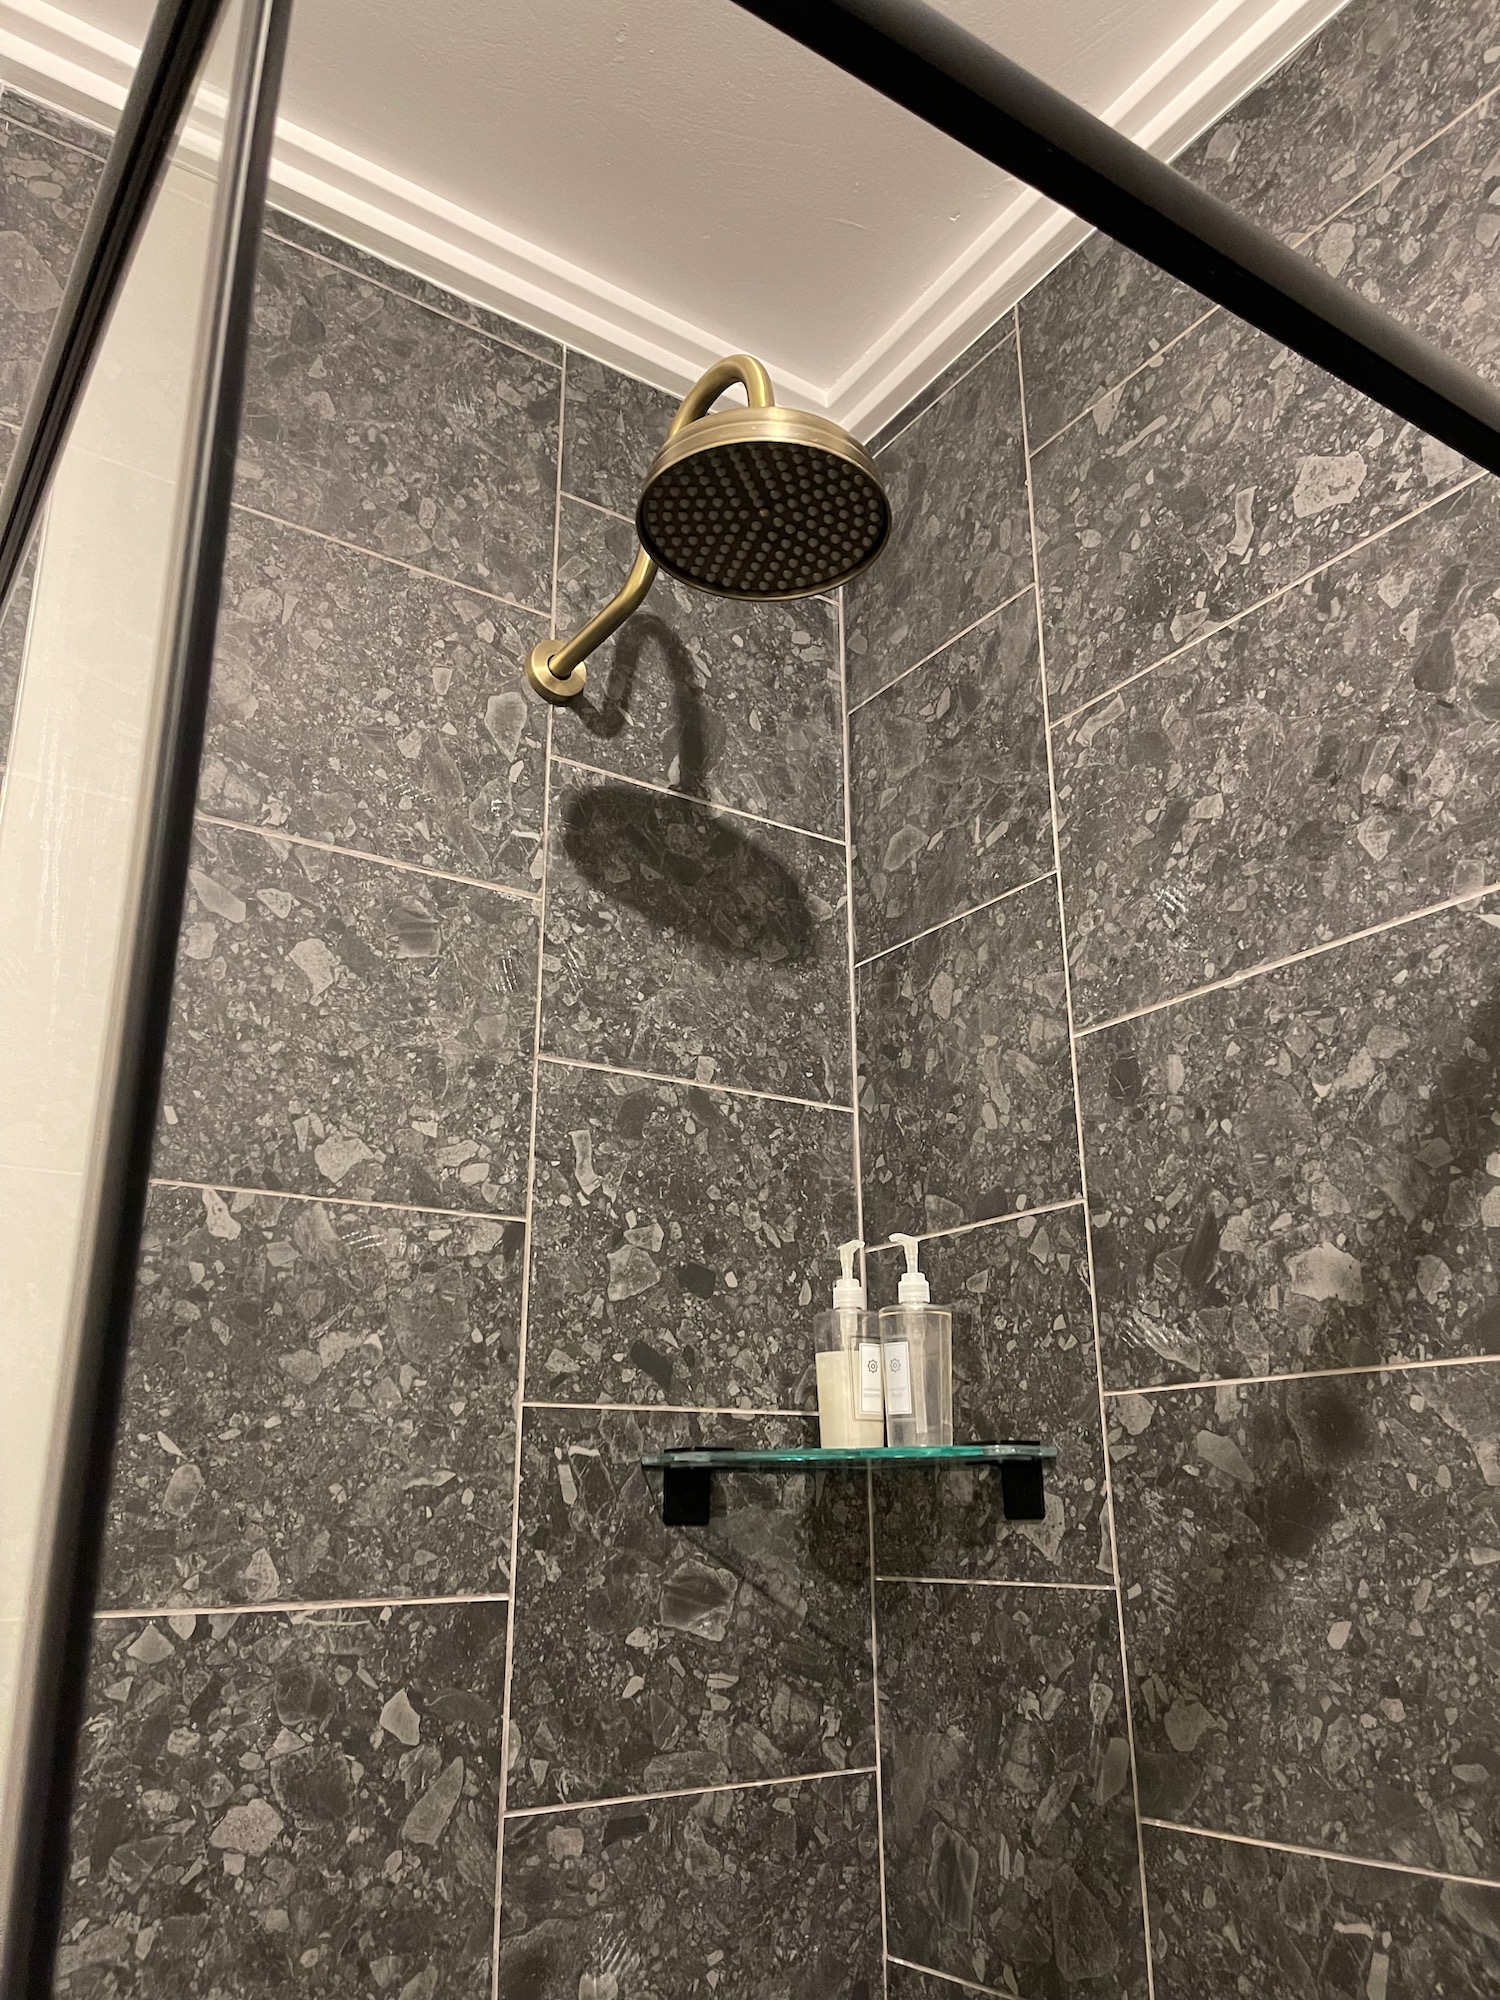 a shower head with soaps on a shelf